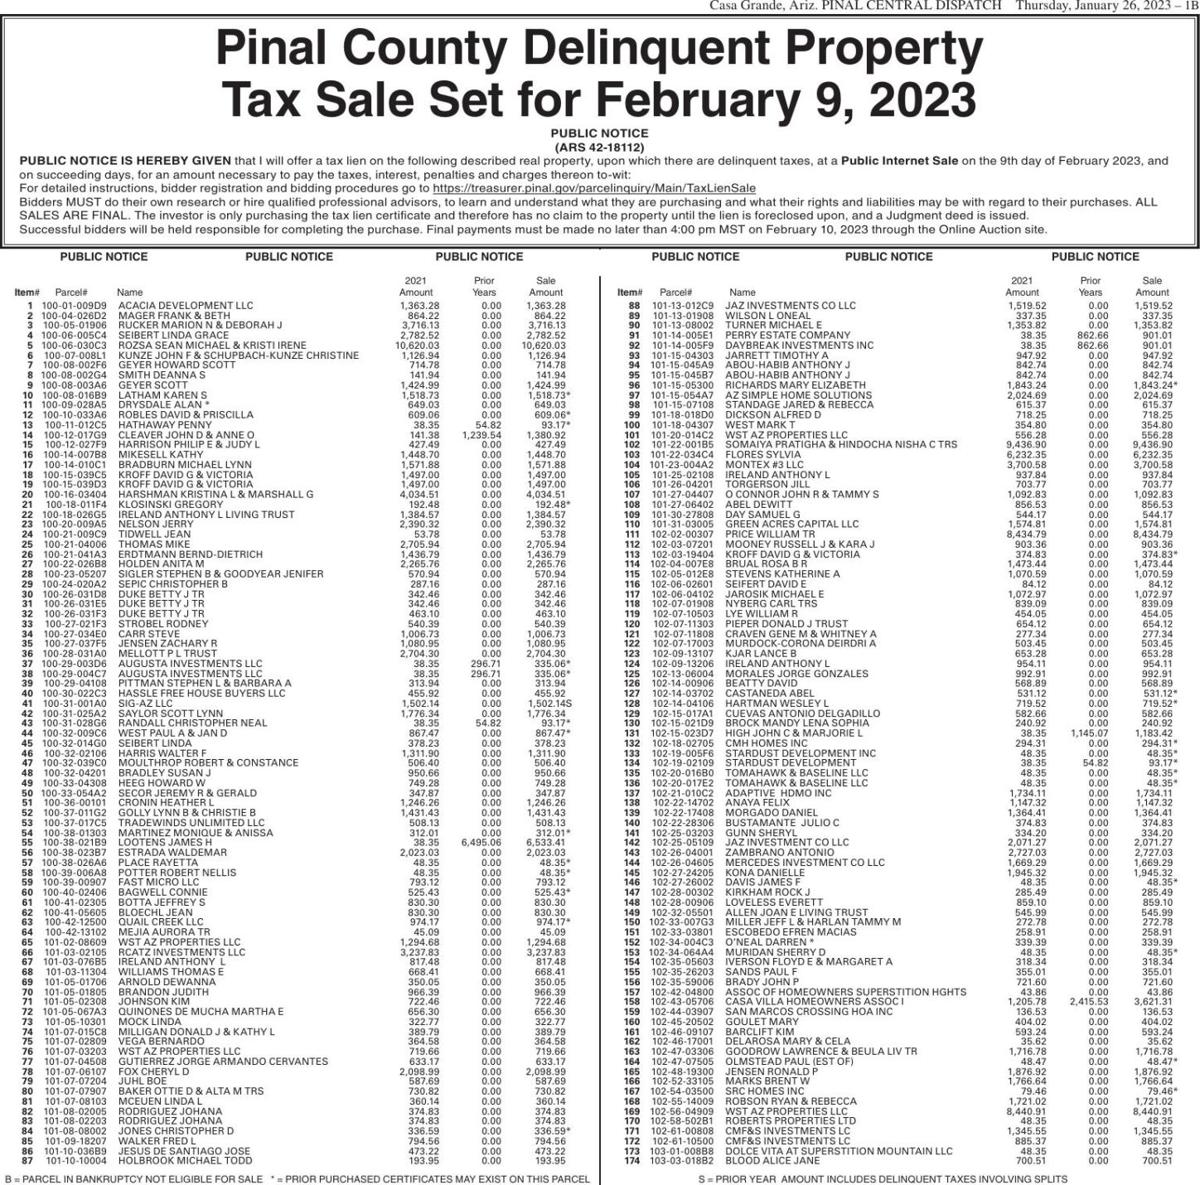 Pinal County Delinquent Tax Sale 2023